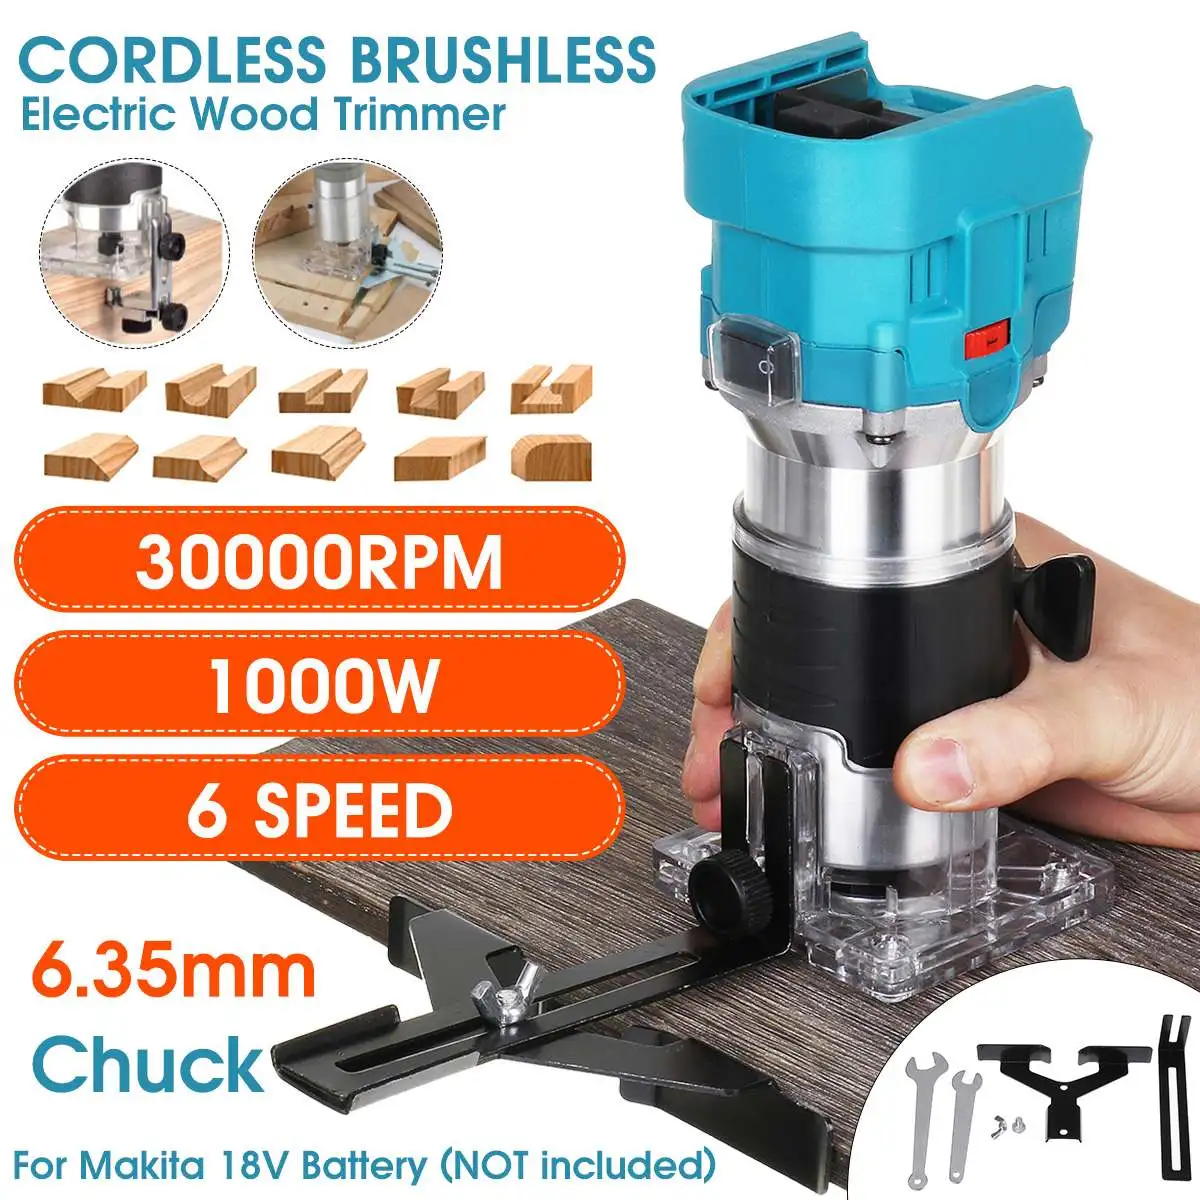 6 Speeds Brushless Cordless Electric Trimmer Hand Engraving Slotting Carving Trimming Machine Wood Router for Makita 18V Battery